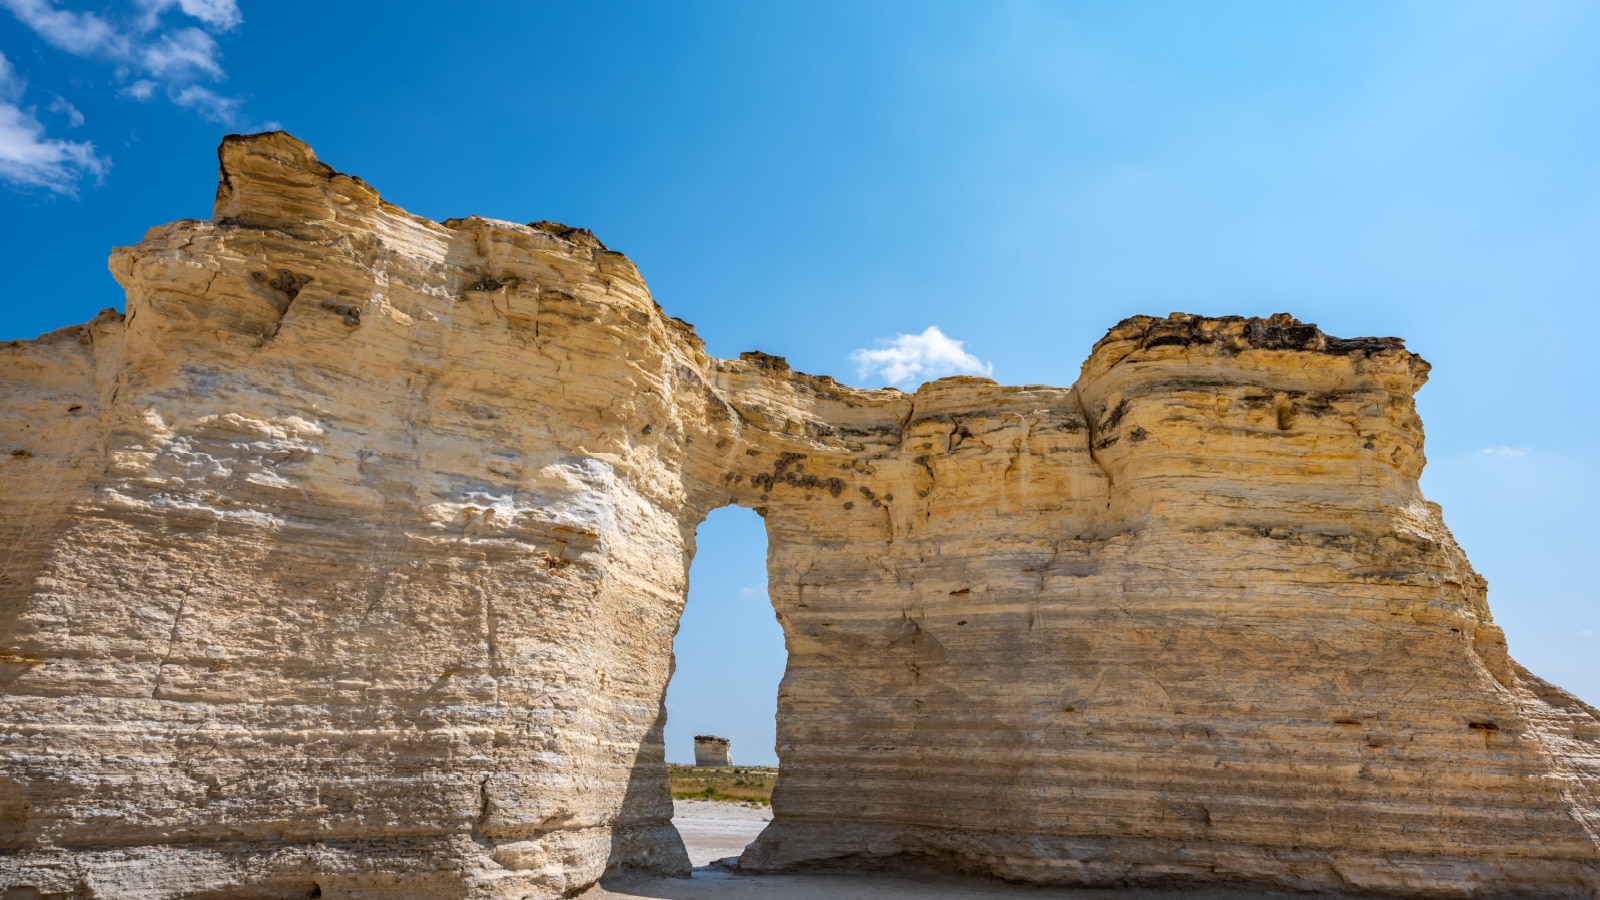 <p>Also known as the “Chalk Pyramids,” these striking rock formations in western Kansas showcase towering sedimentary pillars that create an otherworldly and picturesque landscape.</p>